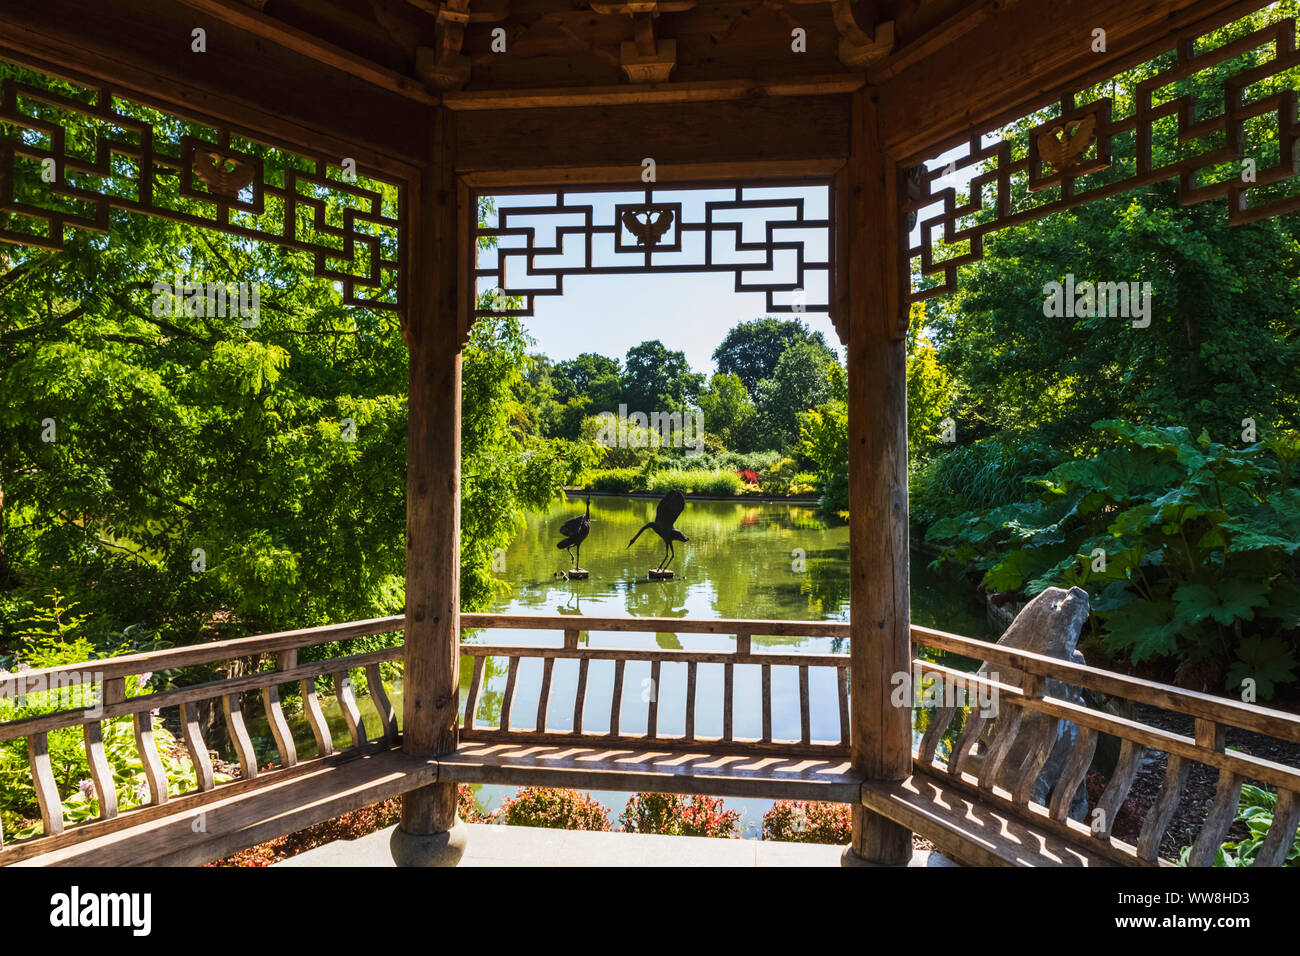 England, Surrey, Guildford, Wisley, The Royal Horticultural Society Garden, Seven Acres Pond and The Japanese Pagoda Stock Photo